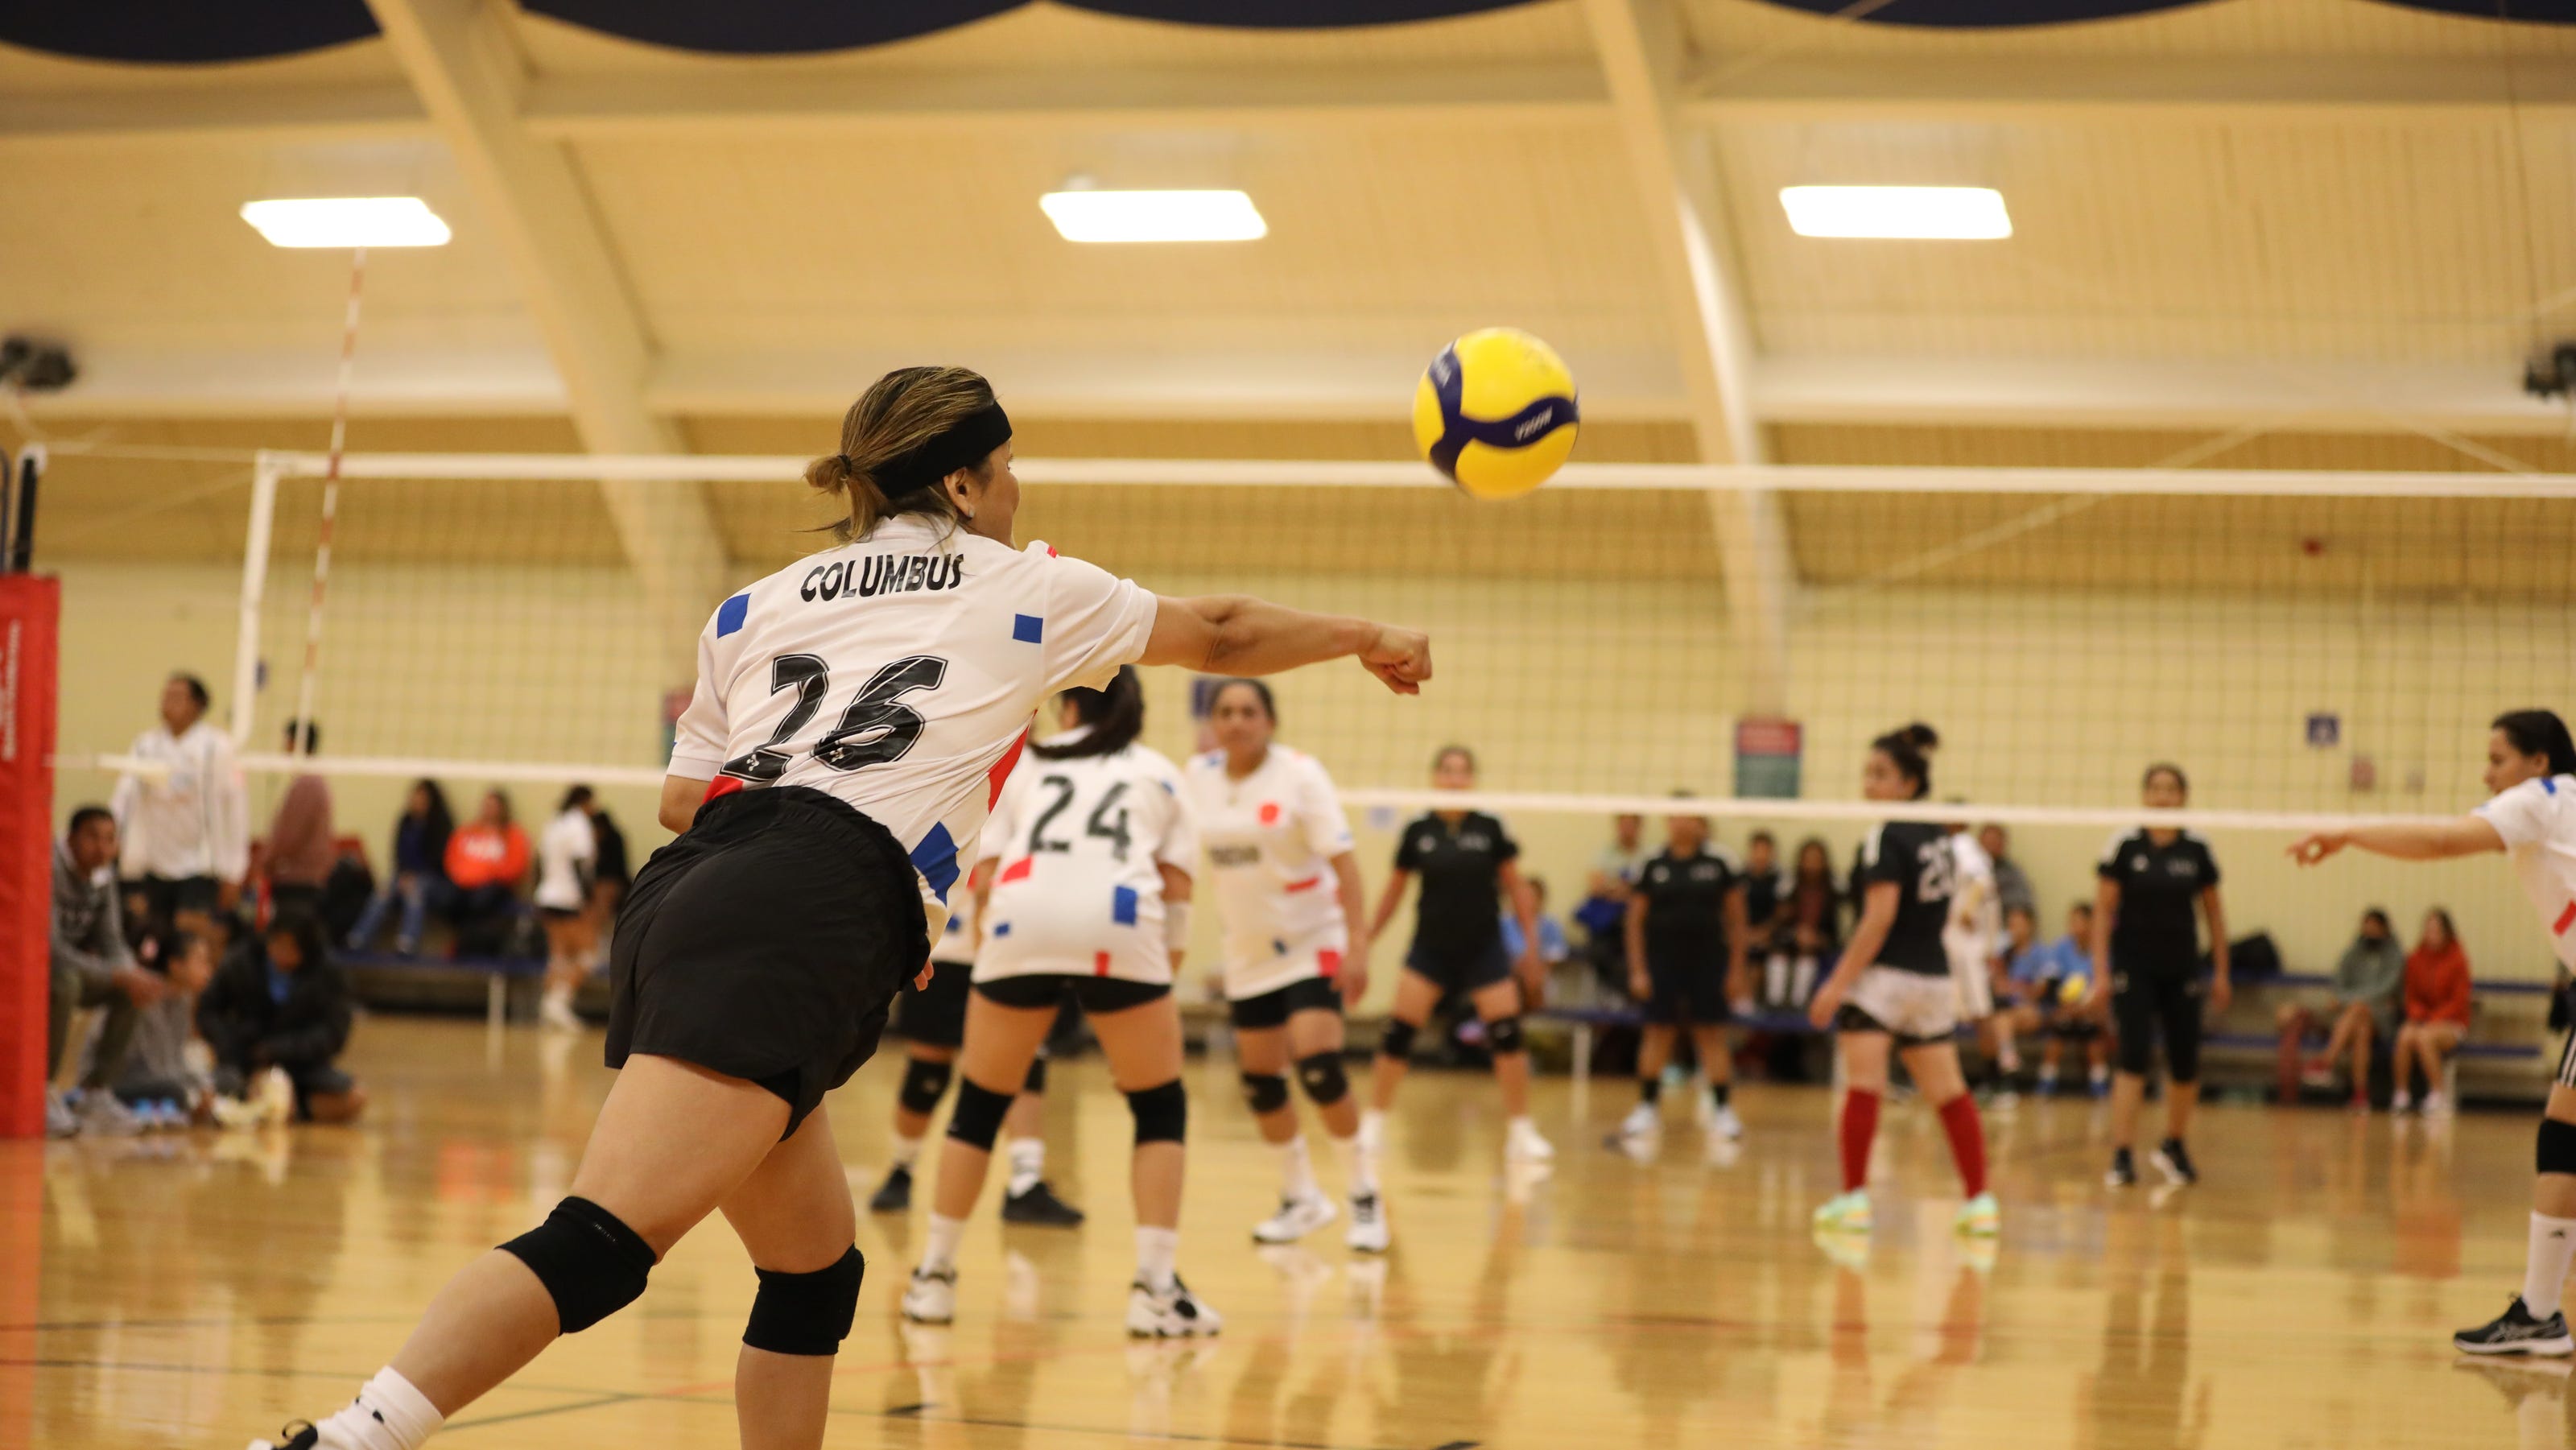   
																Thousands tune in as Columbus hosts Nepali volleyball tournament 
															 